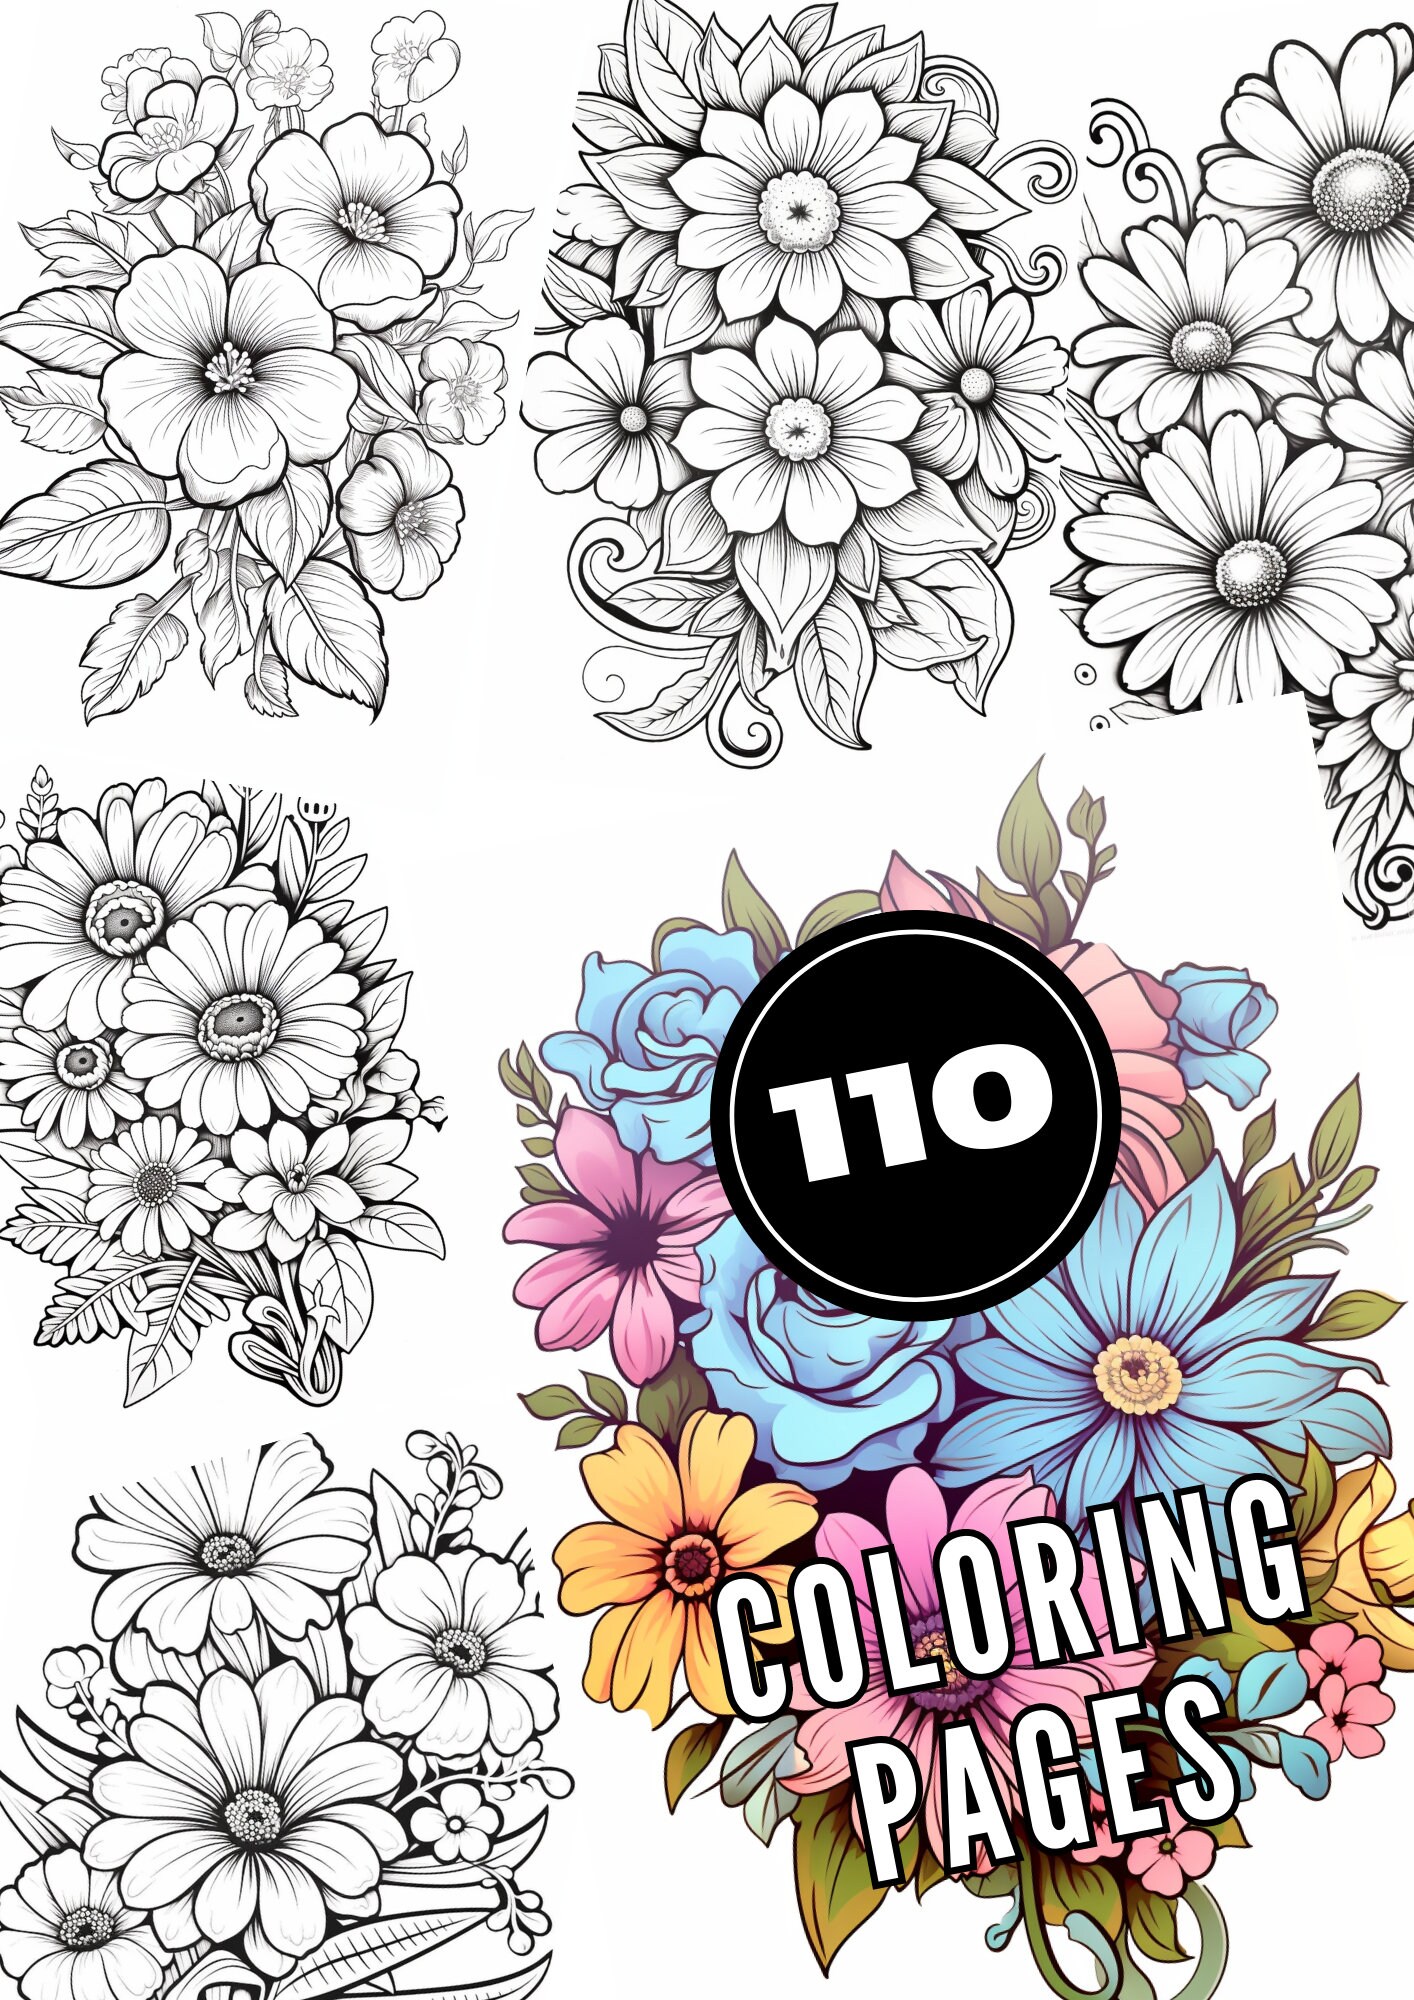 Flower coloring book beautiful designs for mindful relaxation instant download